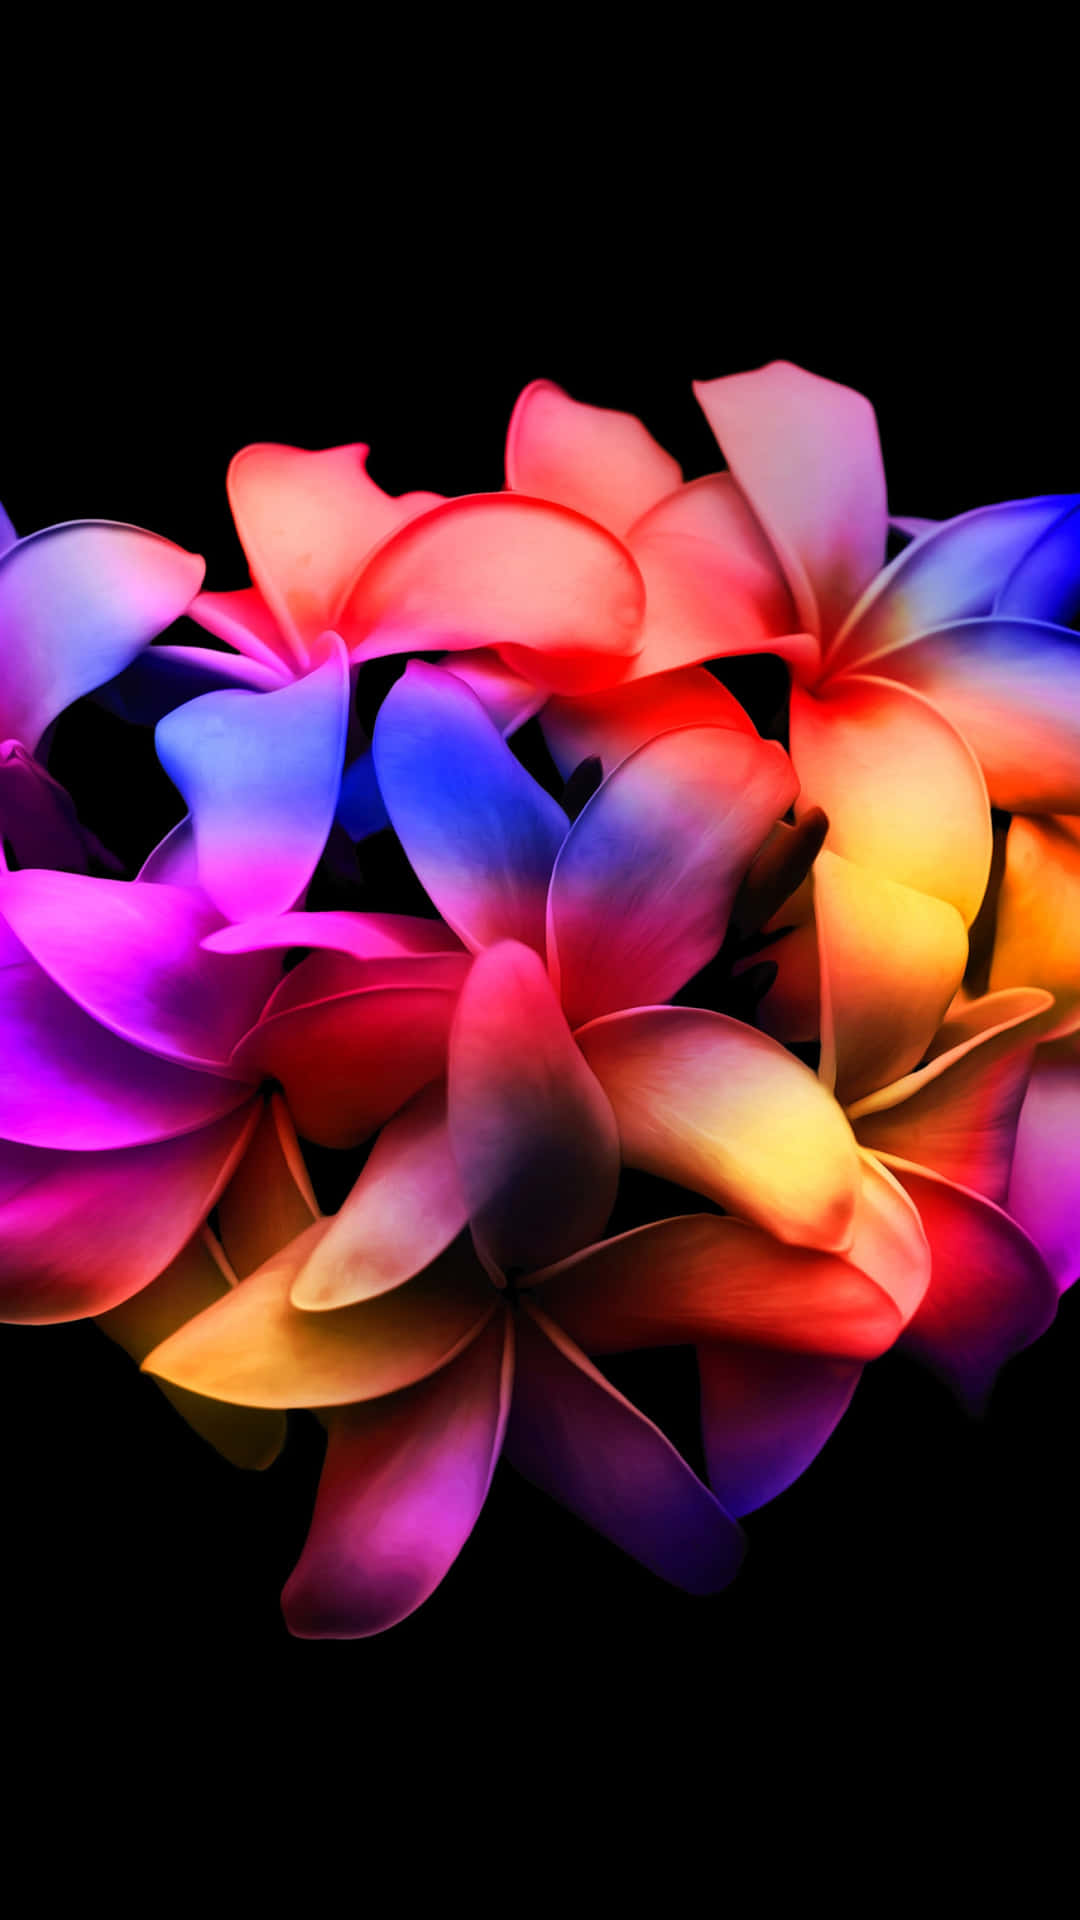 Stunning Assortment of Colorful Flowers Wallpaper